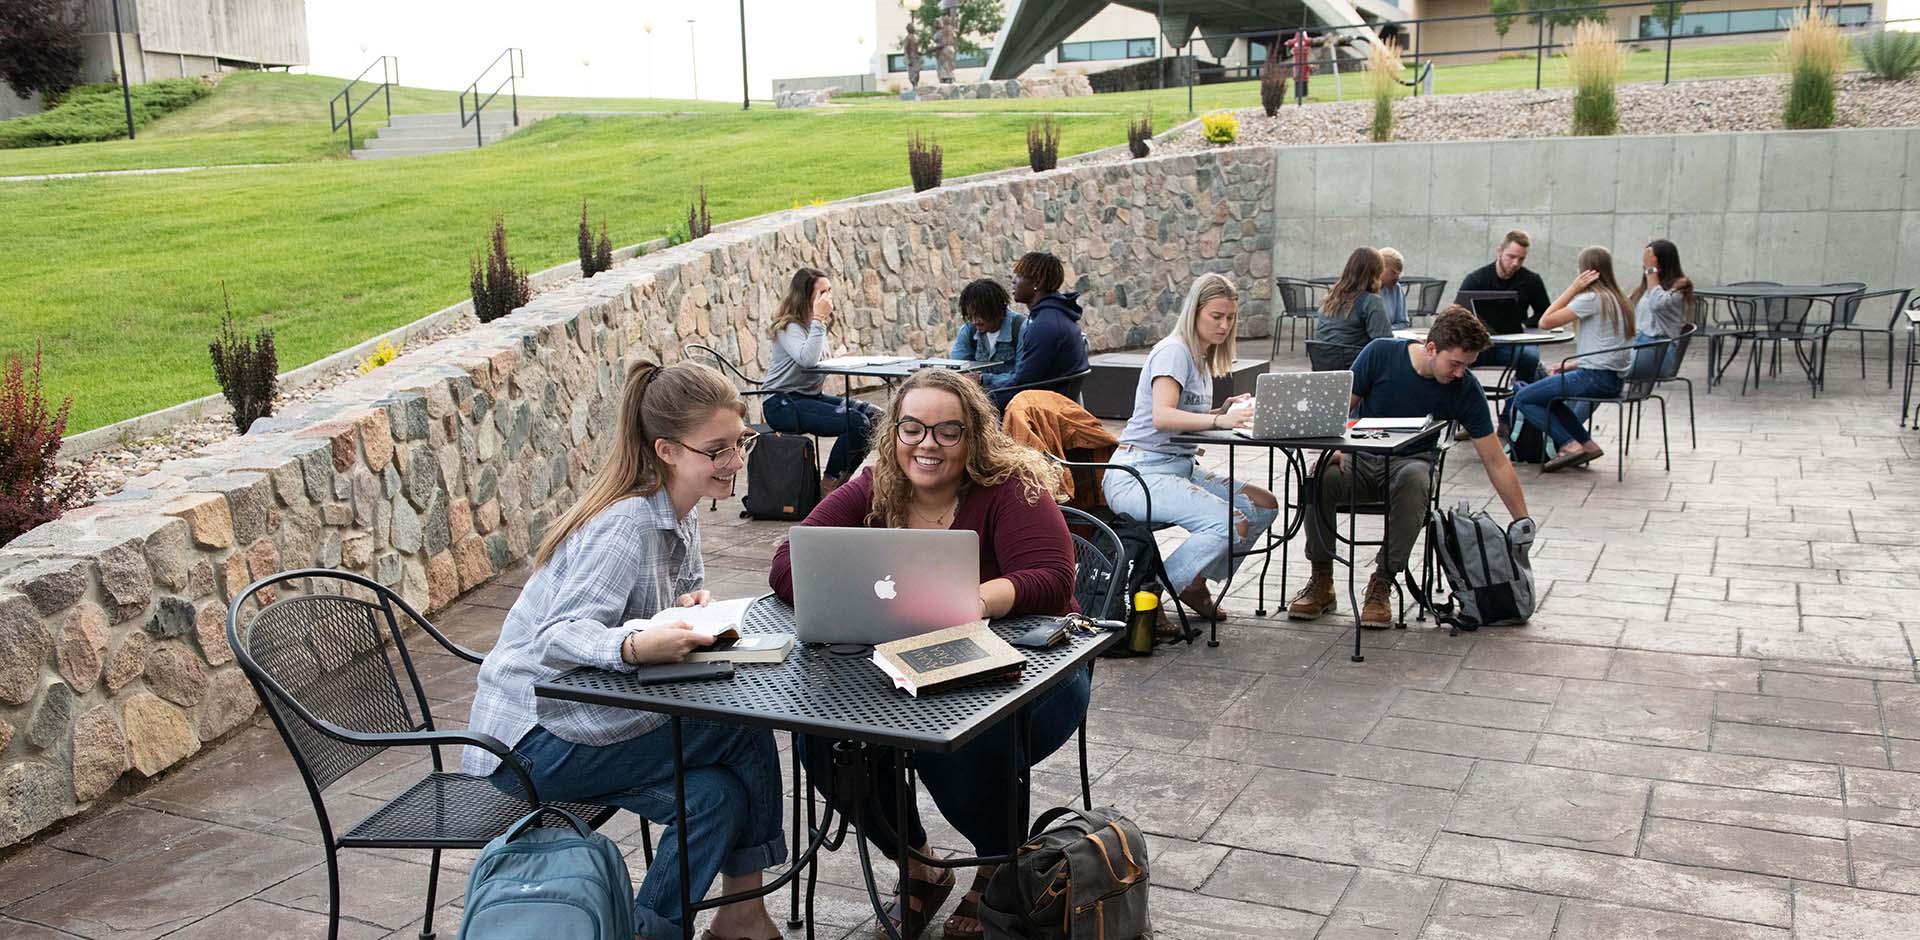 Students studying outside at table on patio